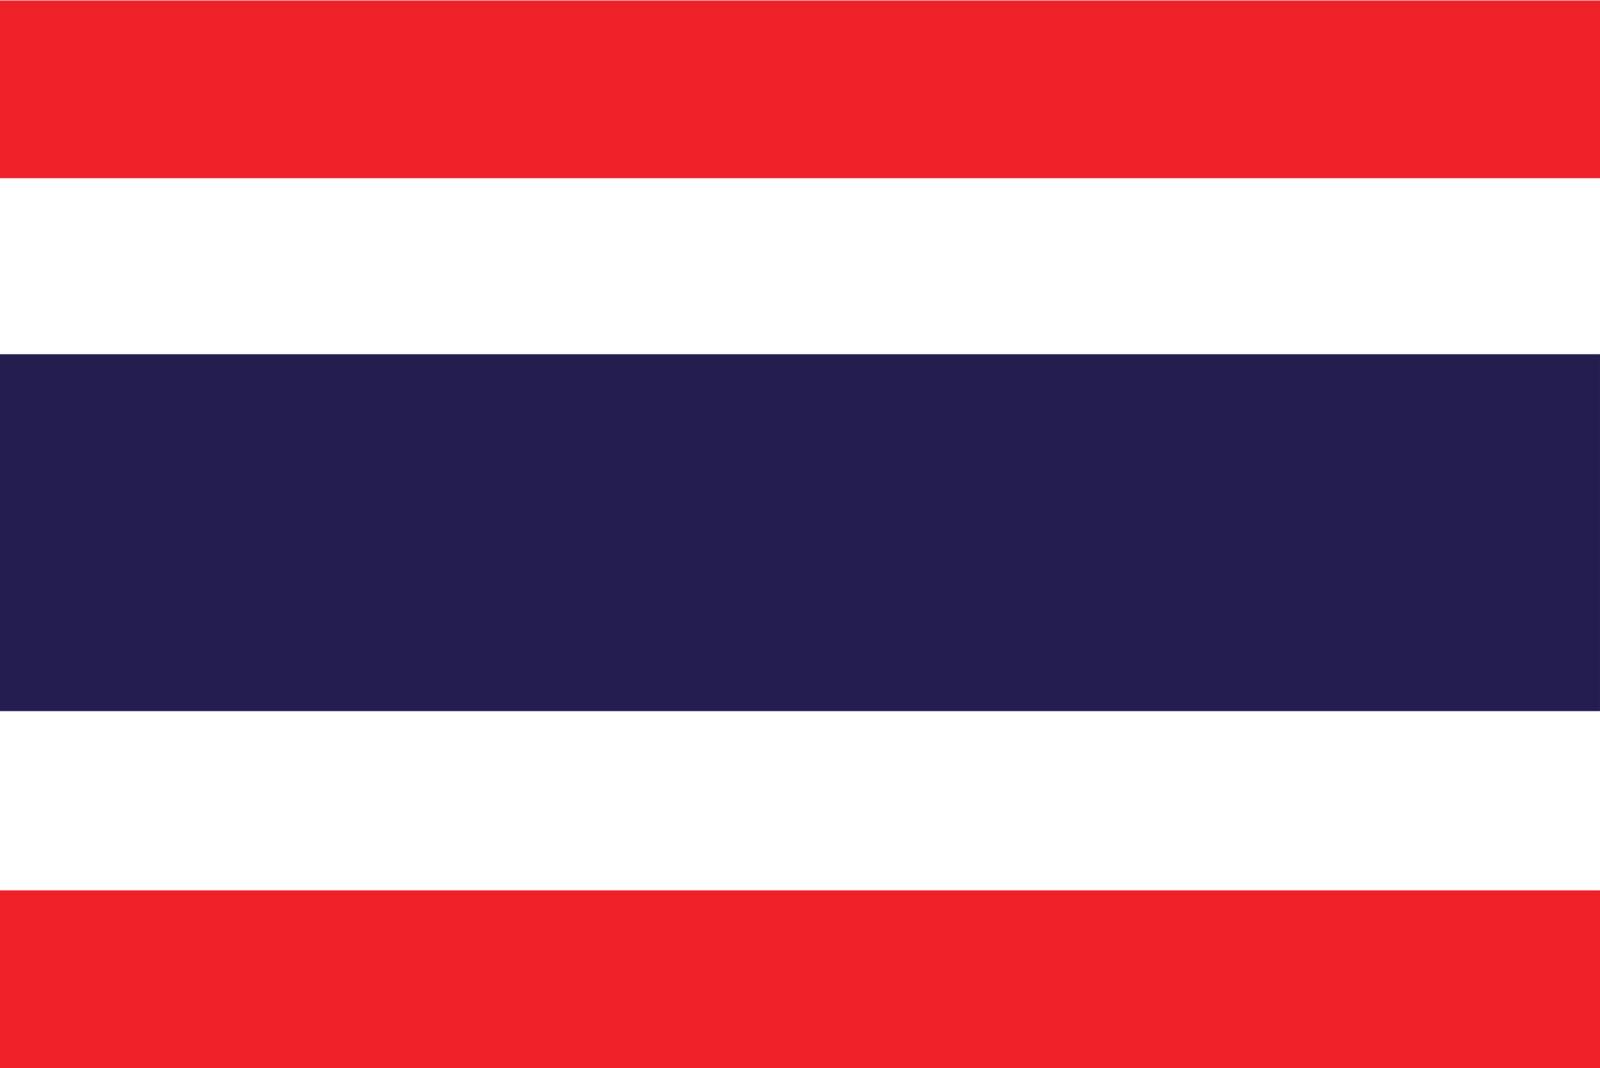 Flag of Thailand by Yaurinko